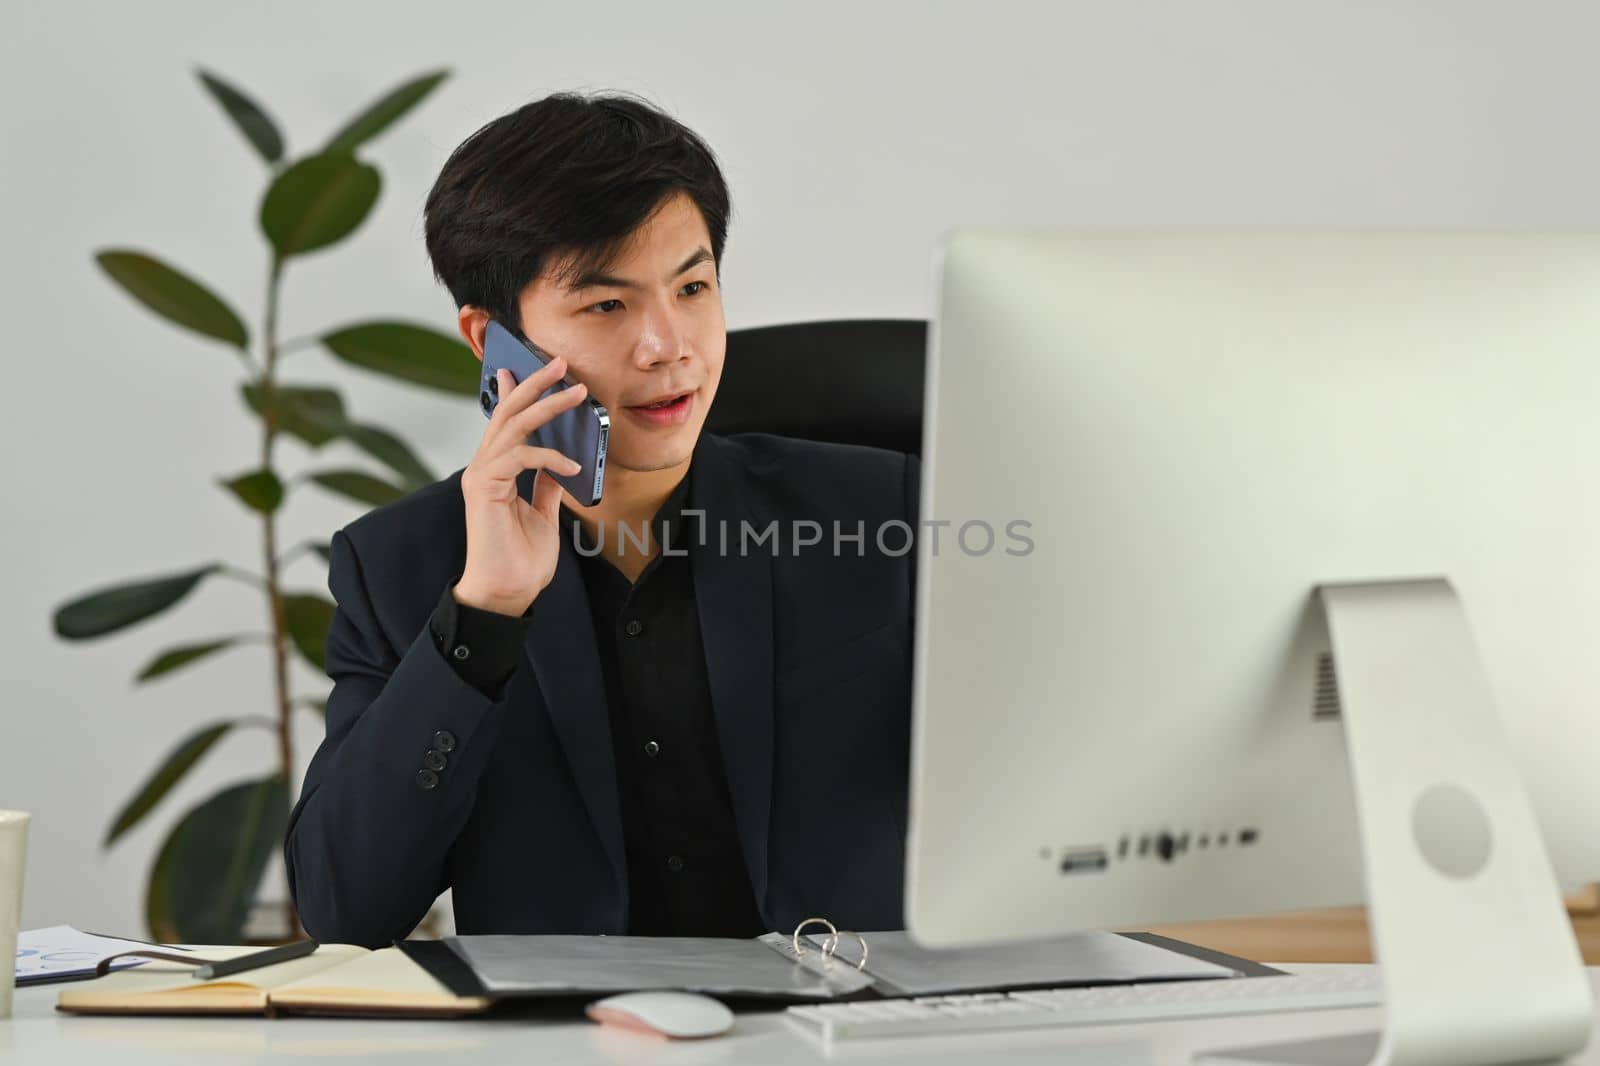 Start up business man making business call, talking on mobile phone and looking at computer monitor.